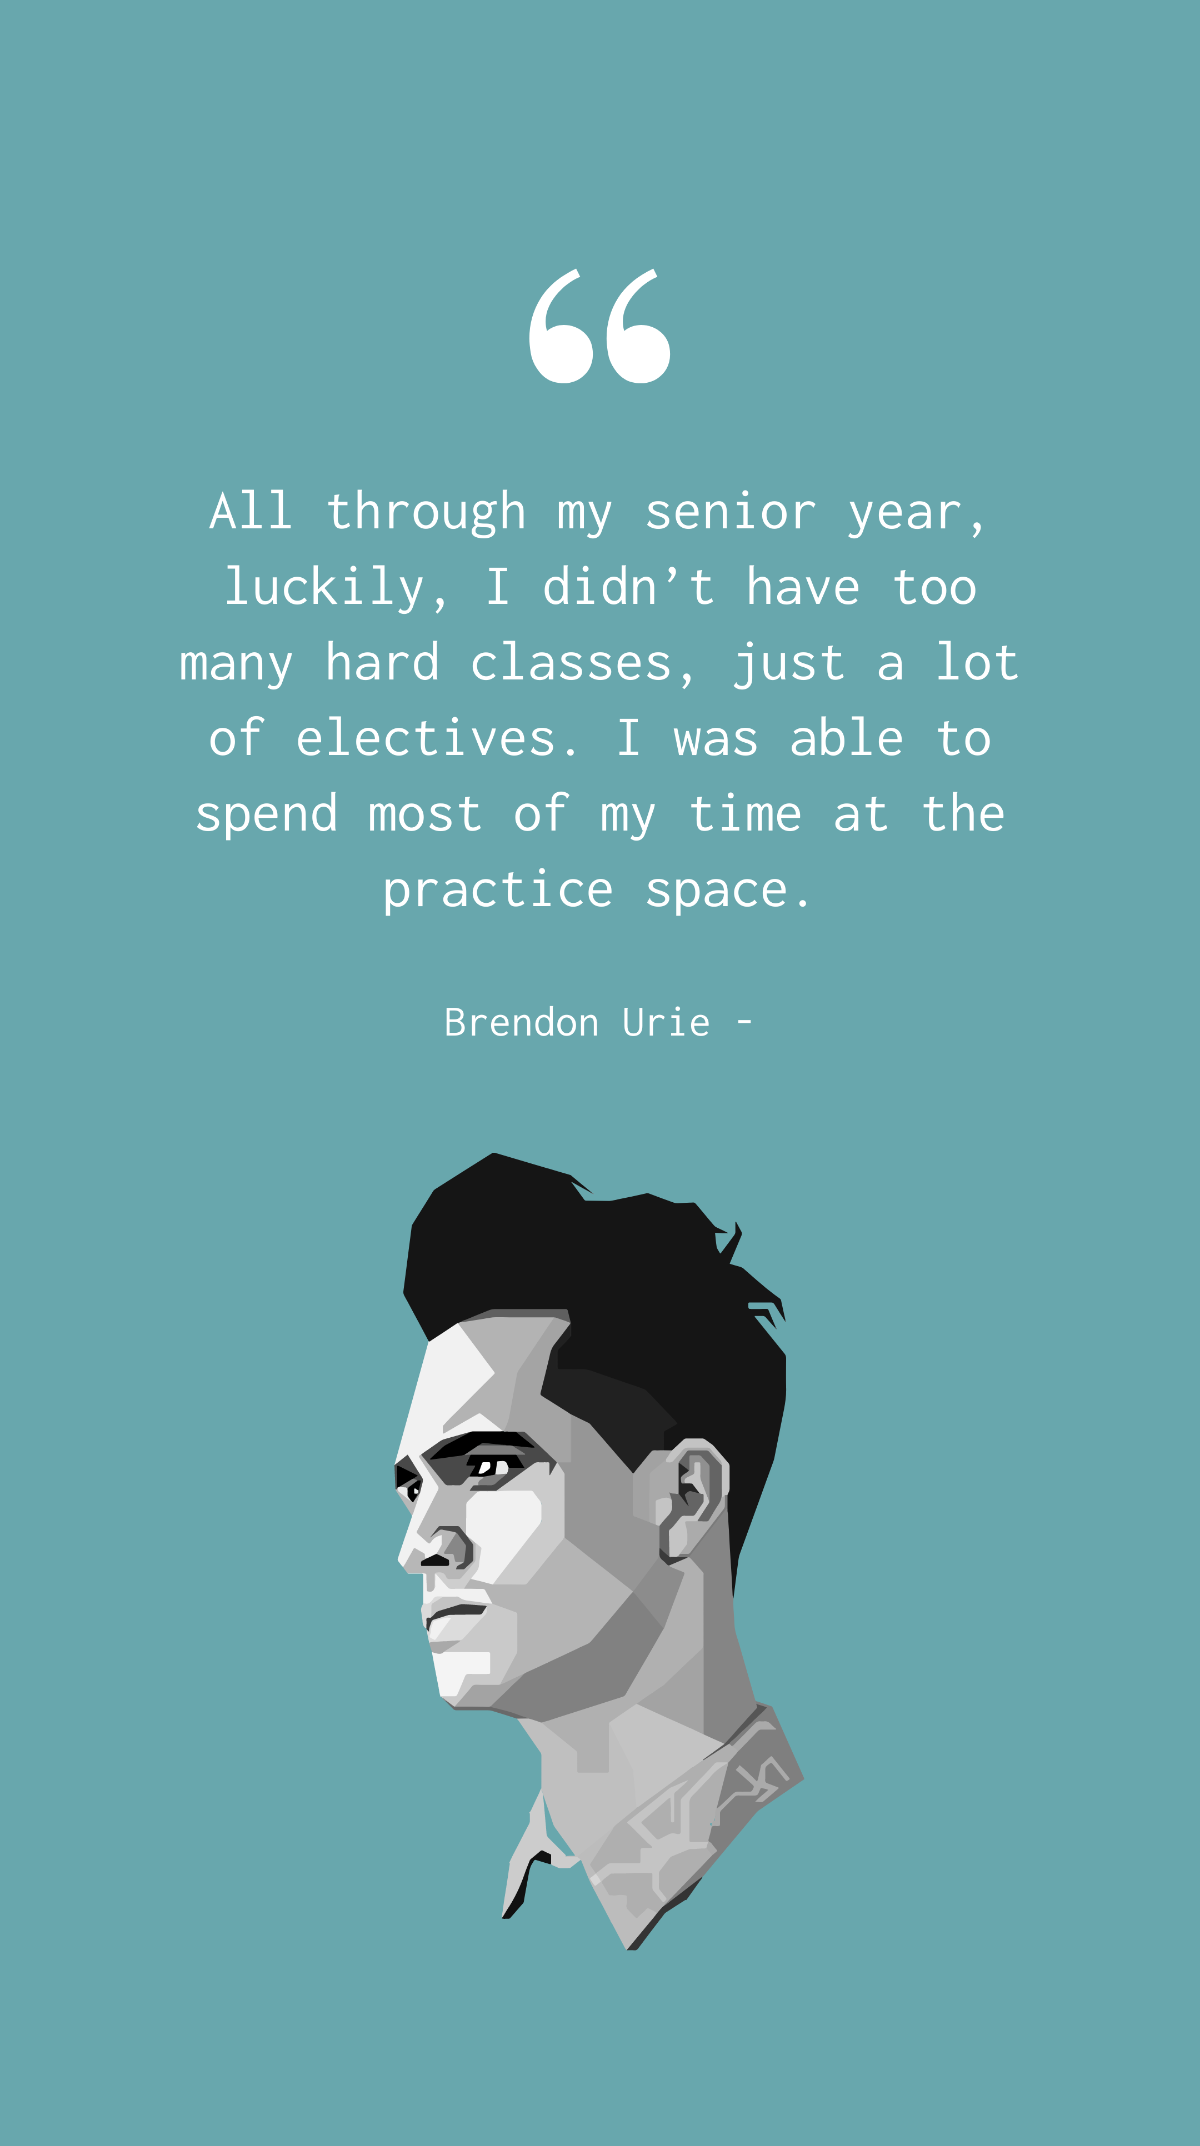 Free Brendon Urie - All through my senior year, luckily, I didn’t have too many hard classes, just a lot of electives. I was able to spend most of my time at the practice space. Template